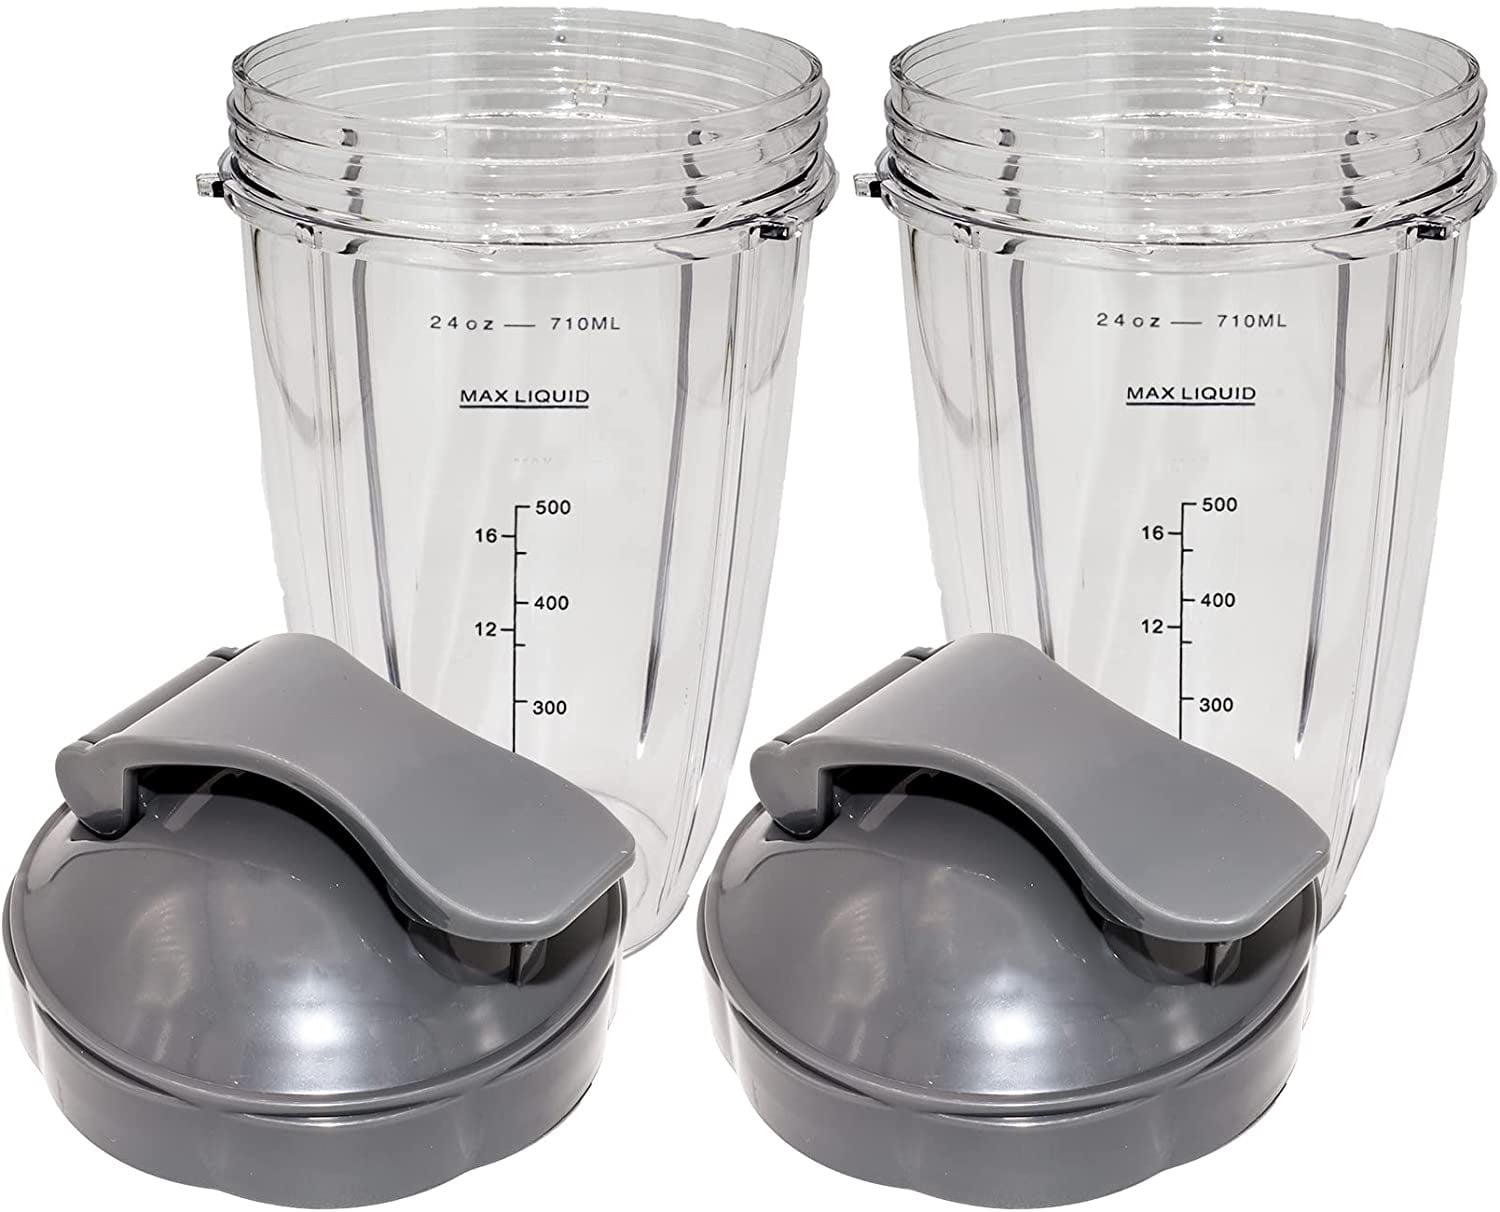 Details about   2 Stay Fresh Resealable Lids w/ Gaskets for Nutribullet Nutri Bullet Cups & Mugs 